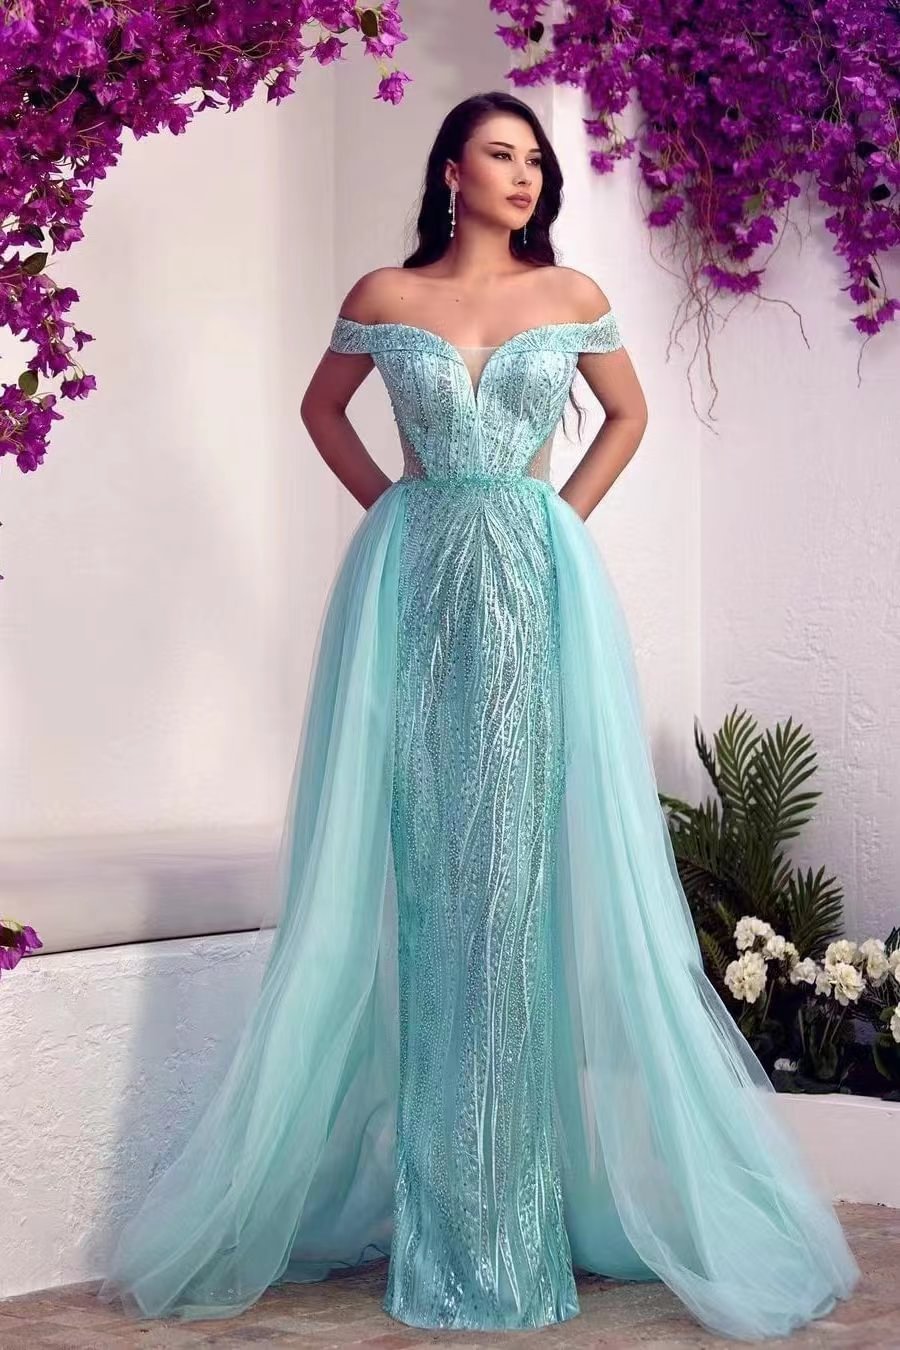 Glamorous Off-The-Shoulder Sweetheart Prom Dress Overskirt Tulle With Sequins Beads |Ballbellas Ballbellas